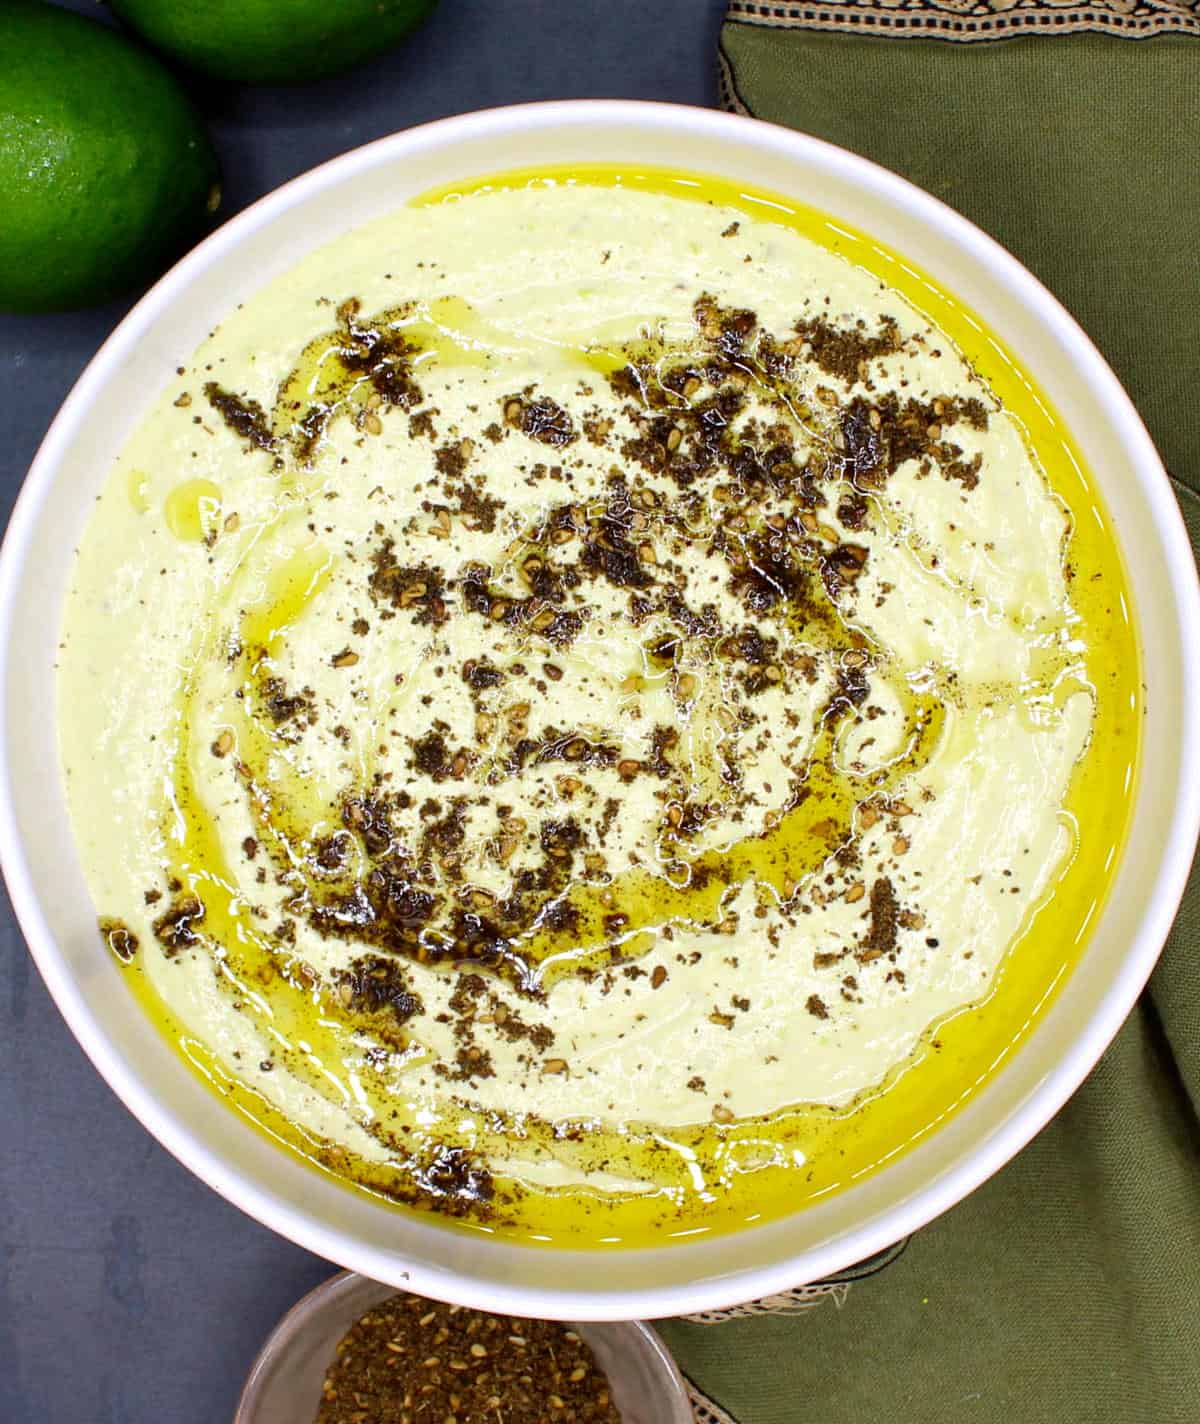 A bowl of fluffy, creamy edamame hummus with za'atar and olive oil. Limes are in the background.